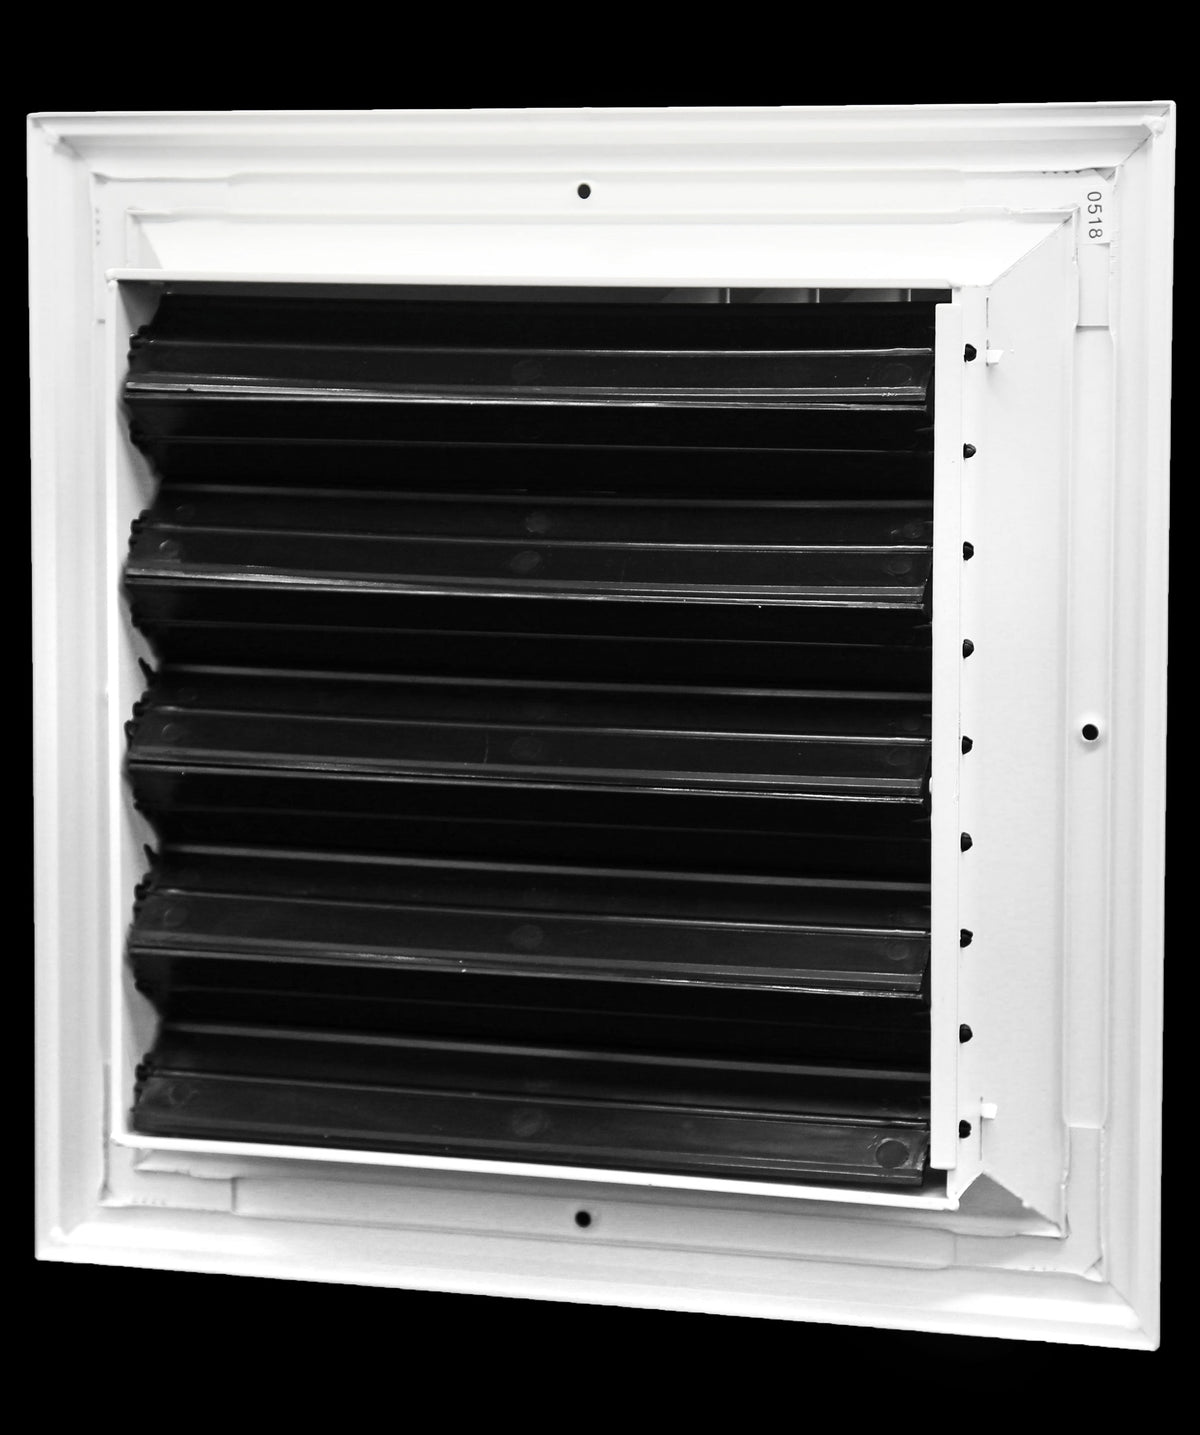 12&quot; x 12&quot; 3-WAY SUPPLY GRILLE - DUCT COVER &amp; DIFFUSER - LOW NOISE - For Ceiling - With Opposing Damper Blades